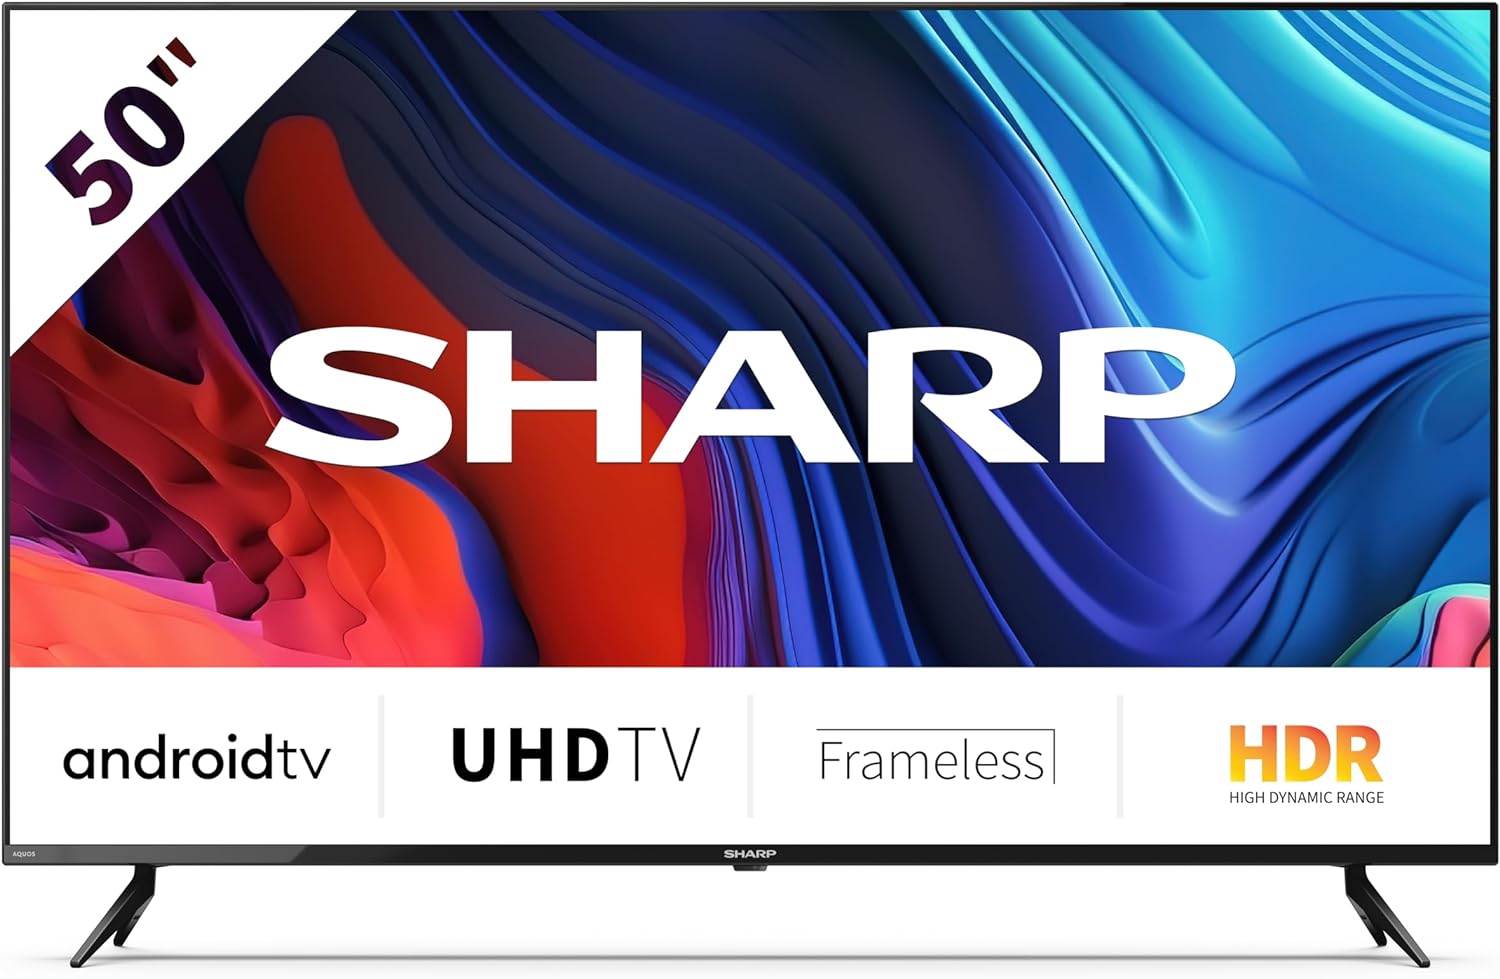 SHARP 50FL1KA 50 - Inch 4K Ultra High Definition Frameless LED Android Smart TV with Freeview HD, Google Assistant, Chromecast, Active Motion 600 - Black - Amazing Gadgets Outlet